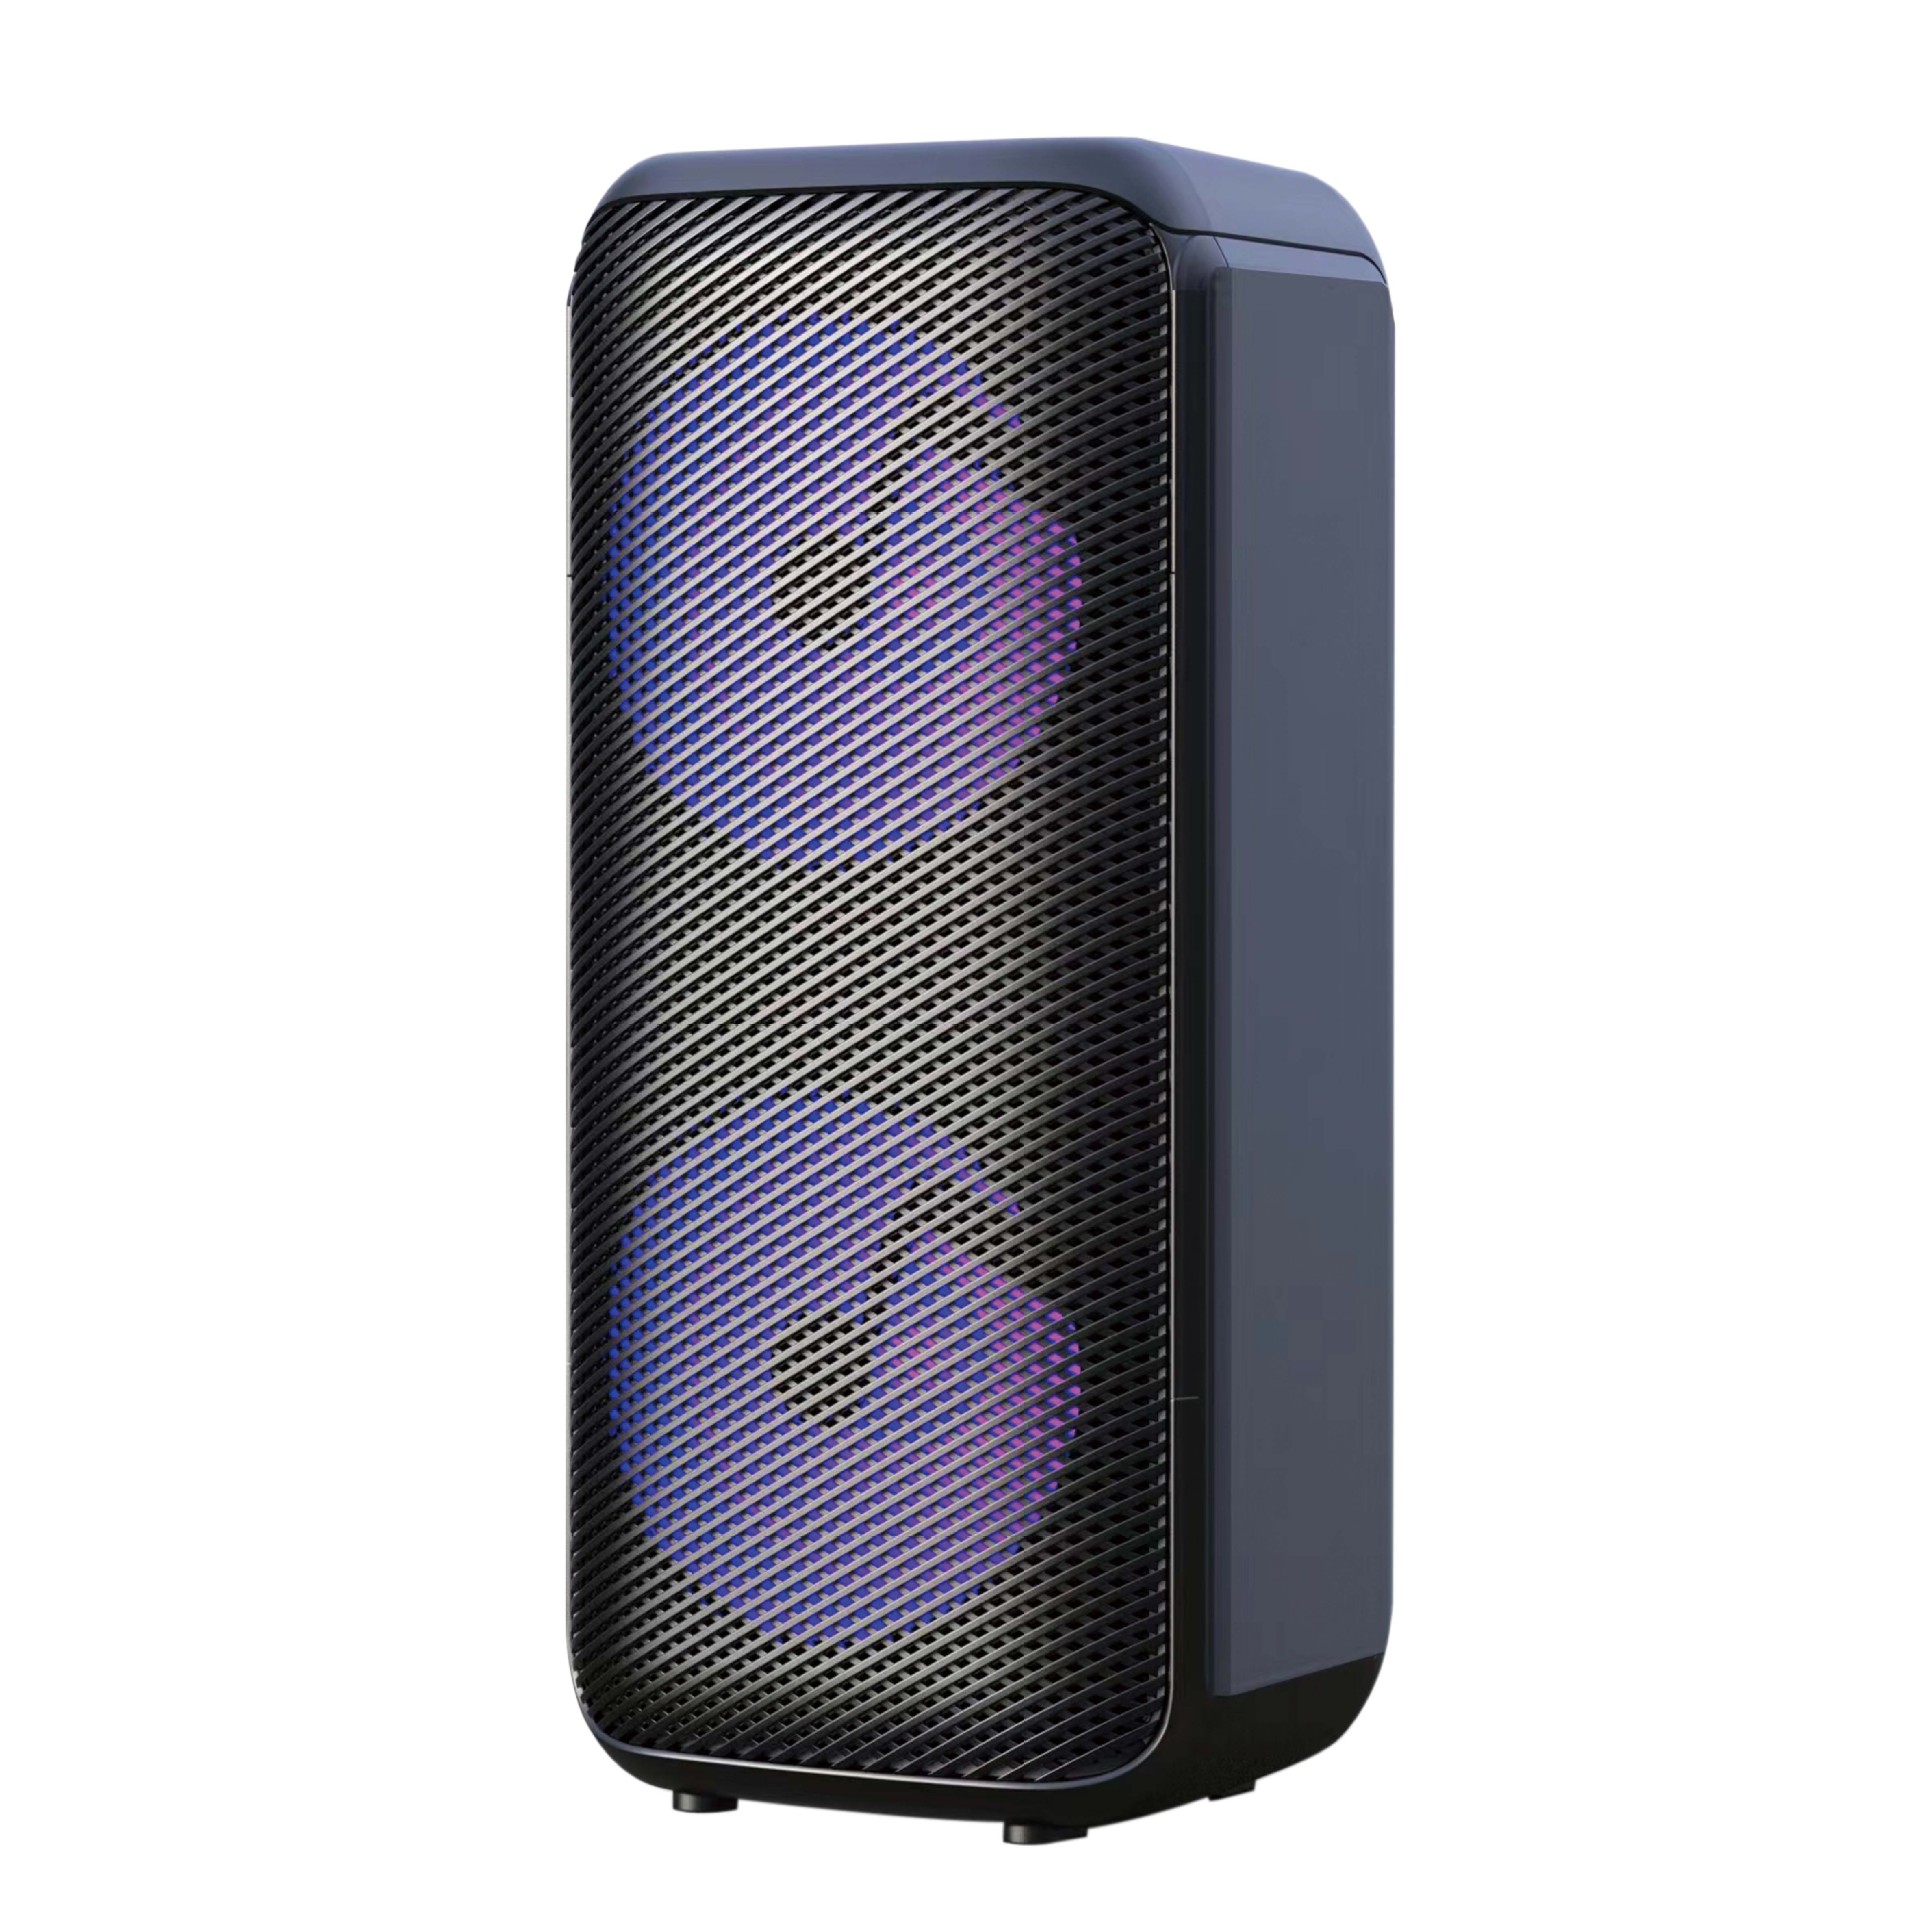 Audio Wireless Bluetooth Large Volume Double 4-Inch Outdoor Portable Square Dance Speaker Microphone Karaoke Colorful Light